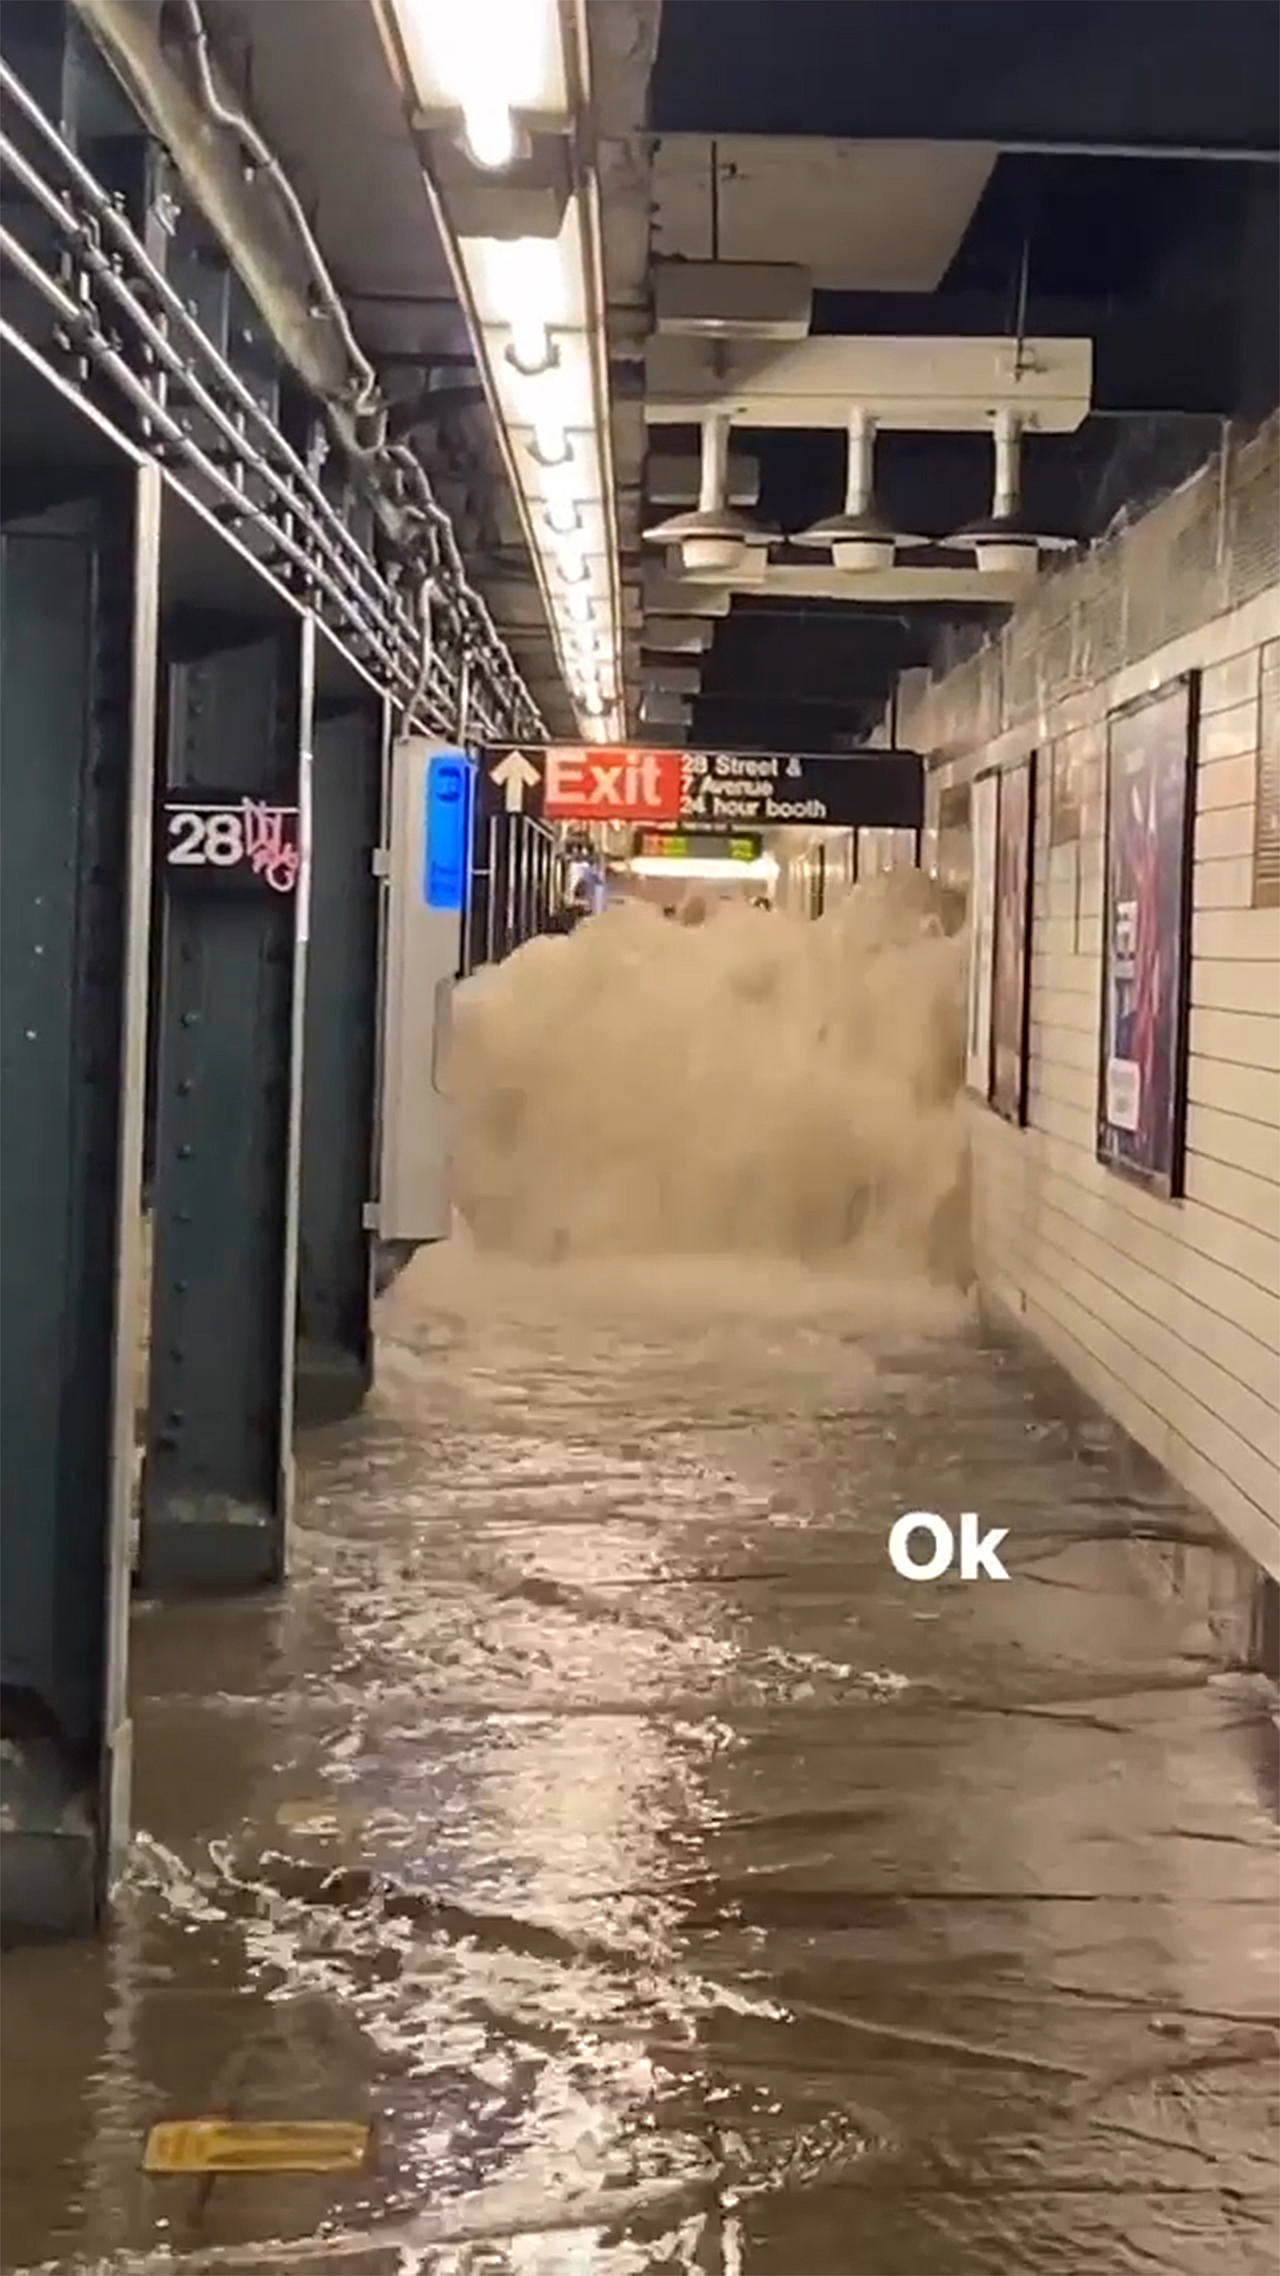 PHOTO: Water pours into the 28th street subway station of the 1 train in New York City, in an image from video posted to social media, as the remnants of Hurricane Ida brought record rainfall to the northeast, Sept. 1, 2021.